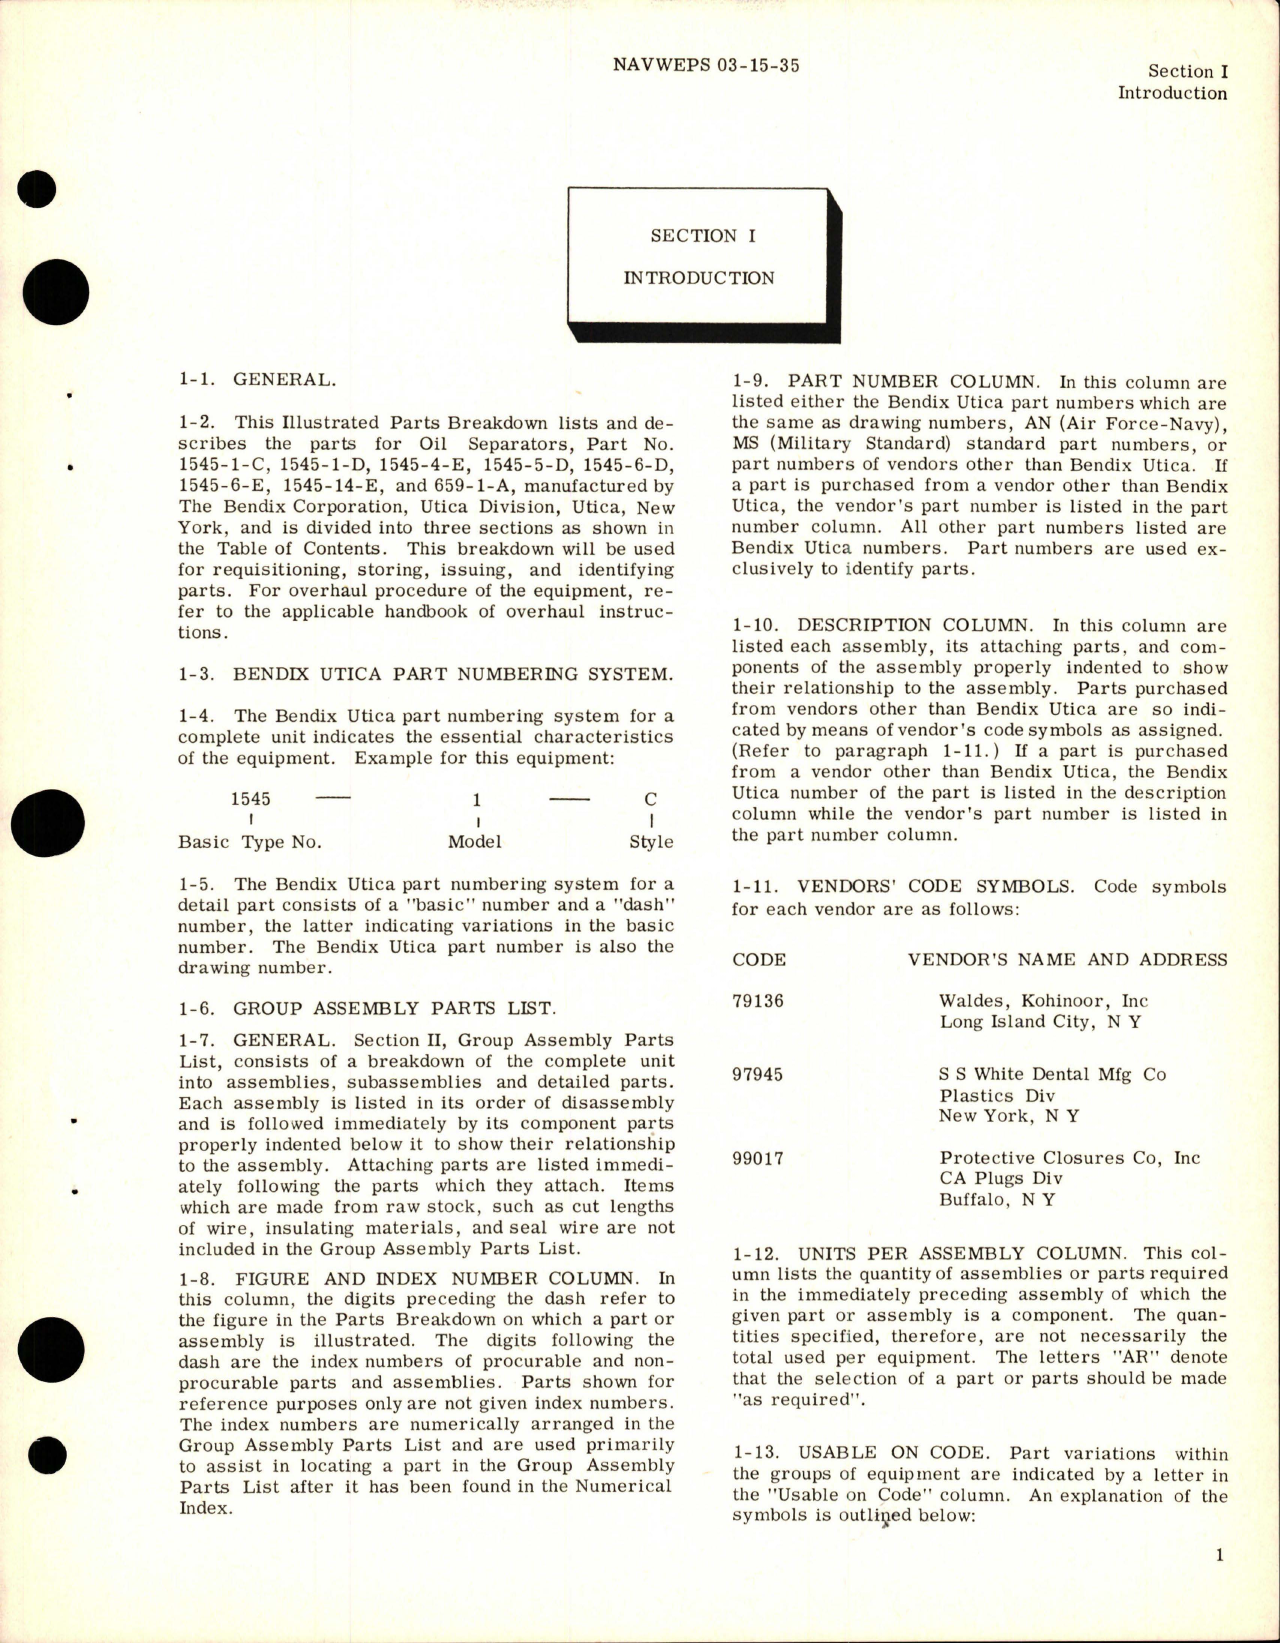 Sample page 5 from AirCorps Library document: Illustrated Parts Breakdown for Oil Separator